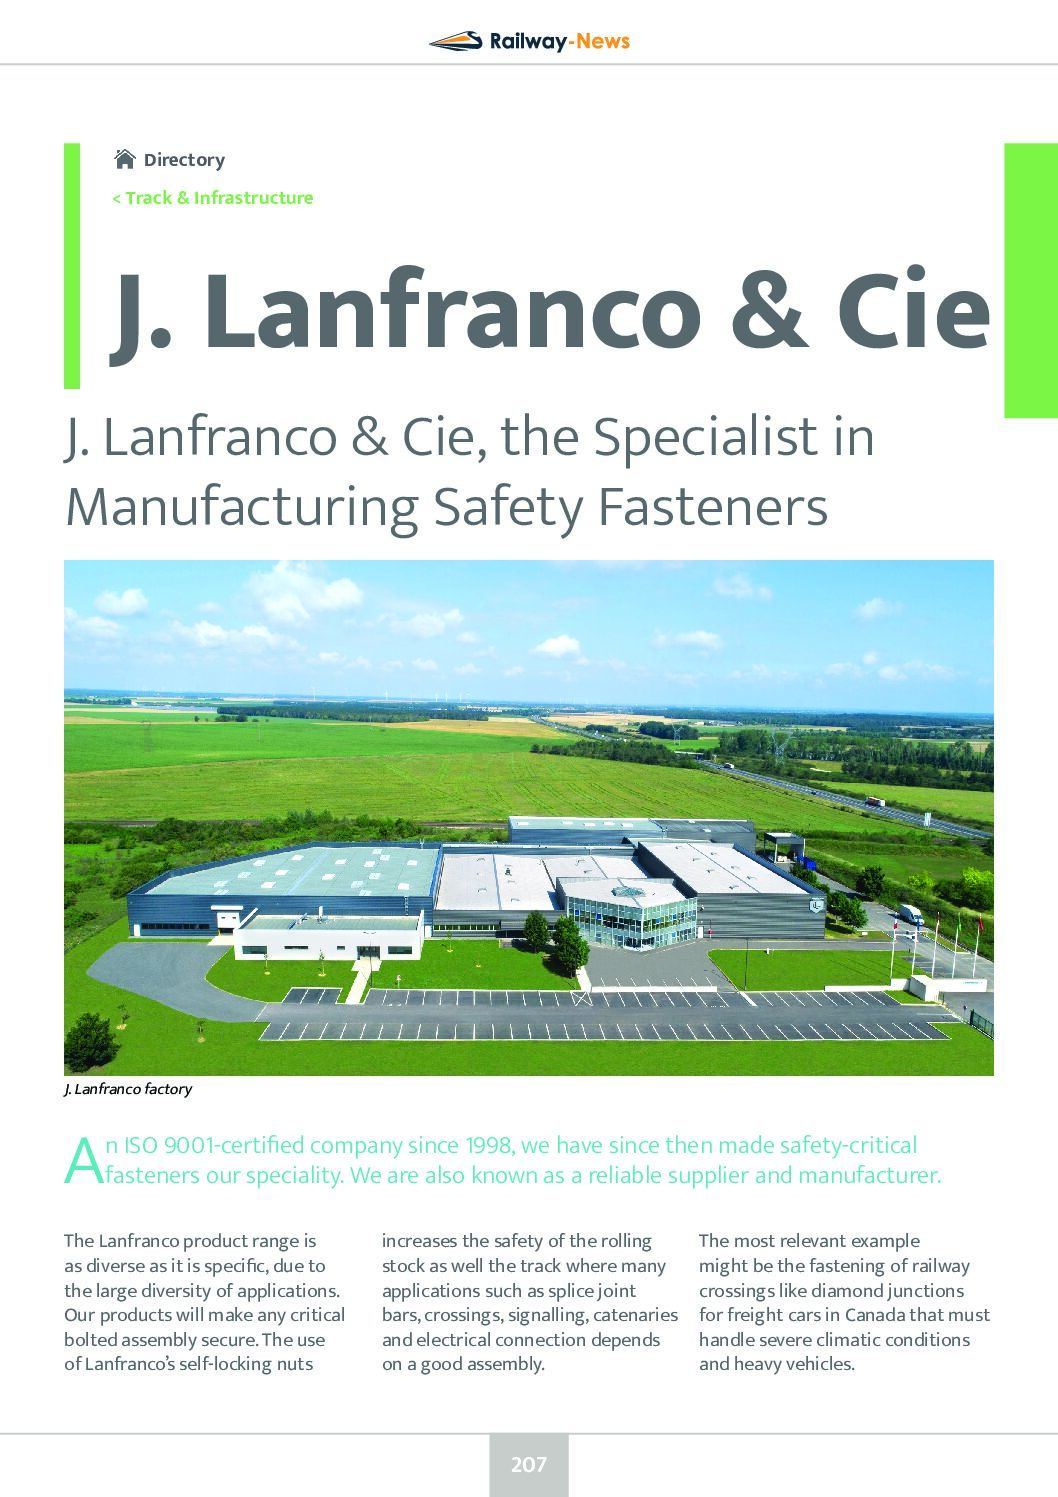 J. Lanfranco & Cie, Specialist in Manufacturing Safety Fasteners